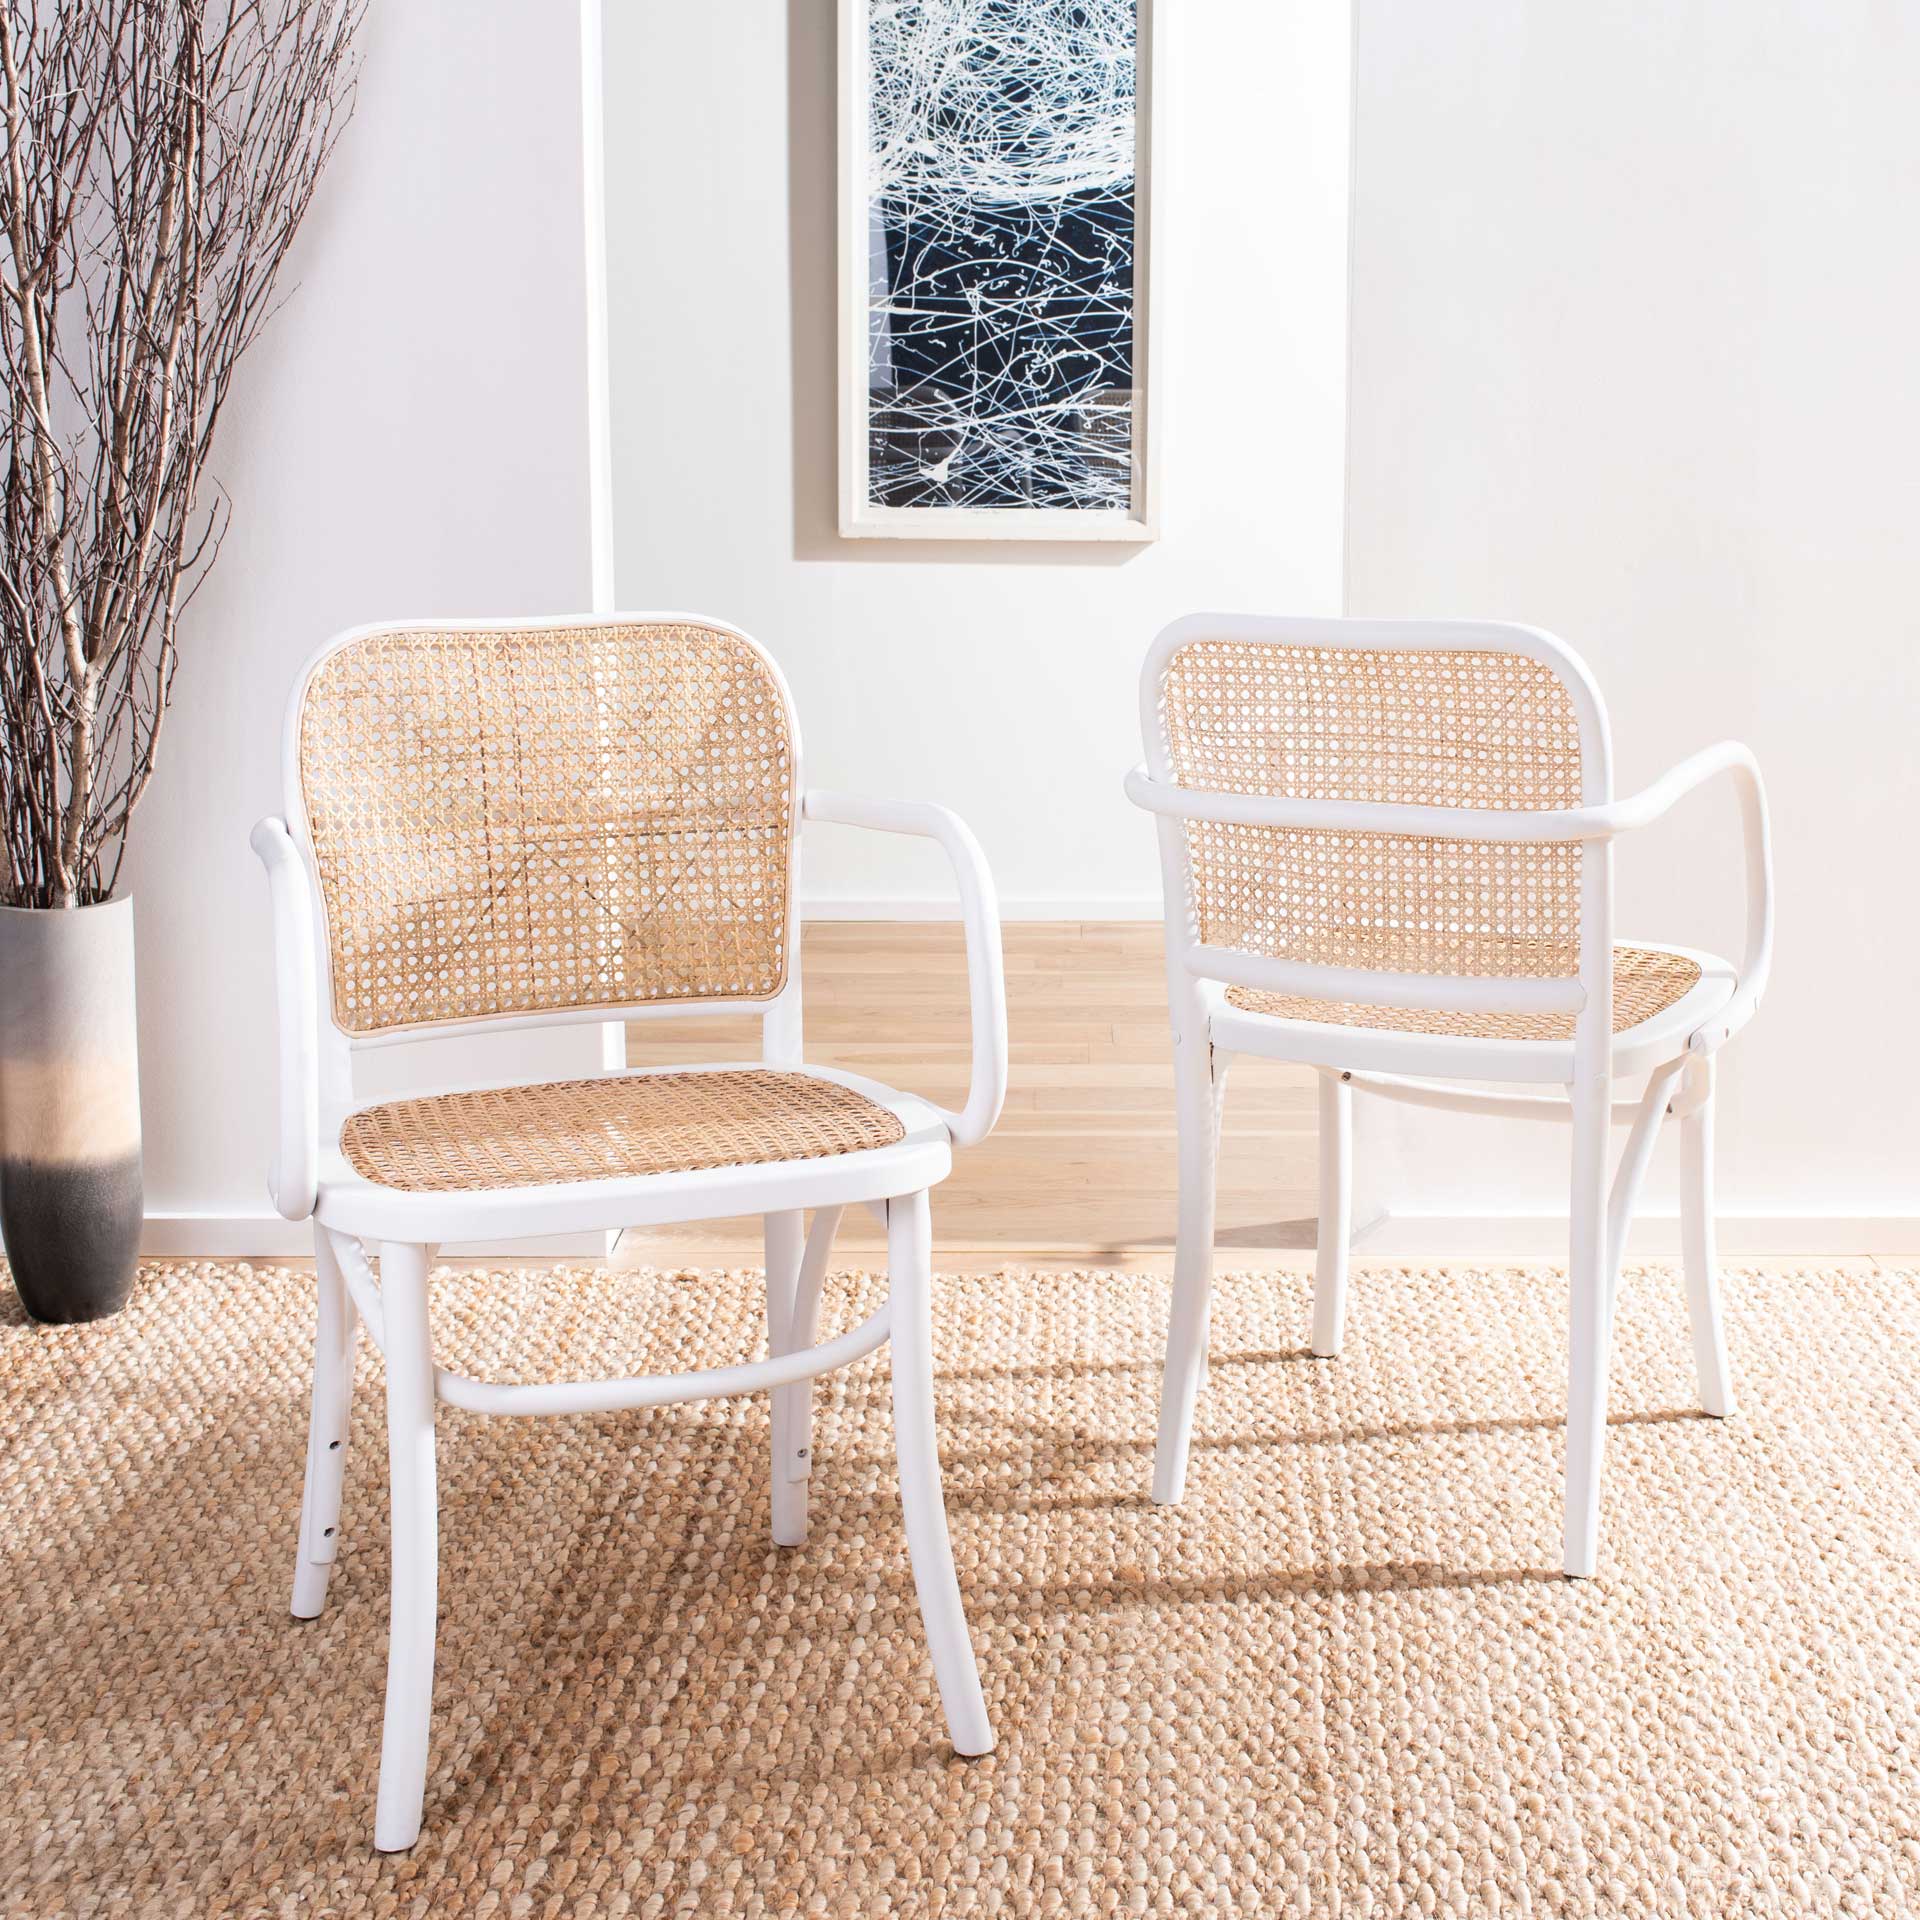 Keanu Cane Dining Chair White/Natural